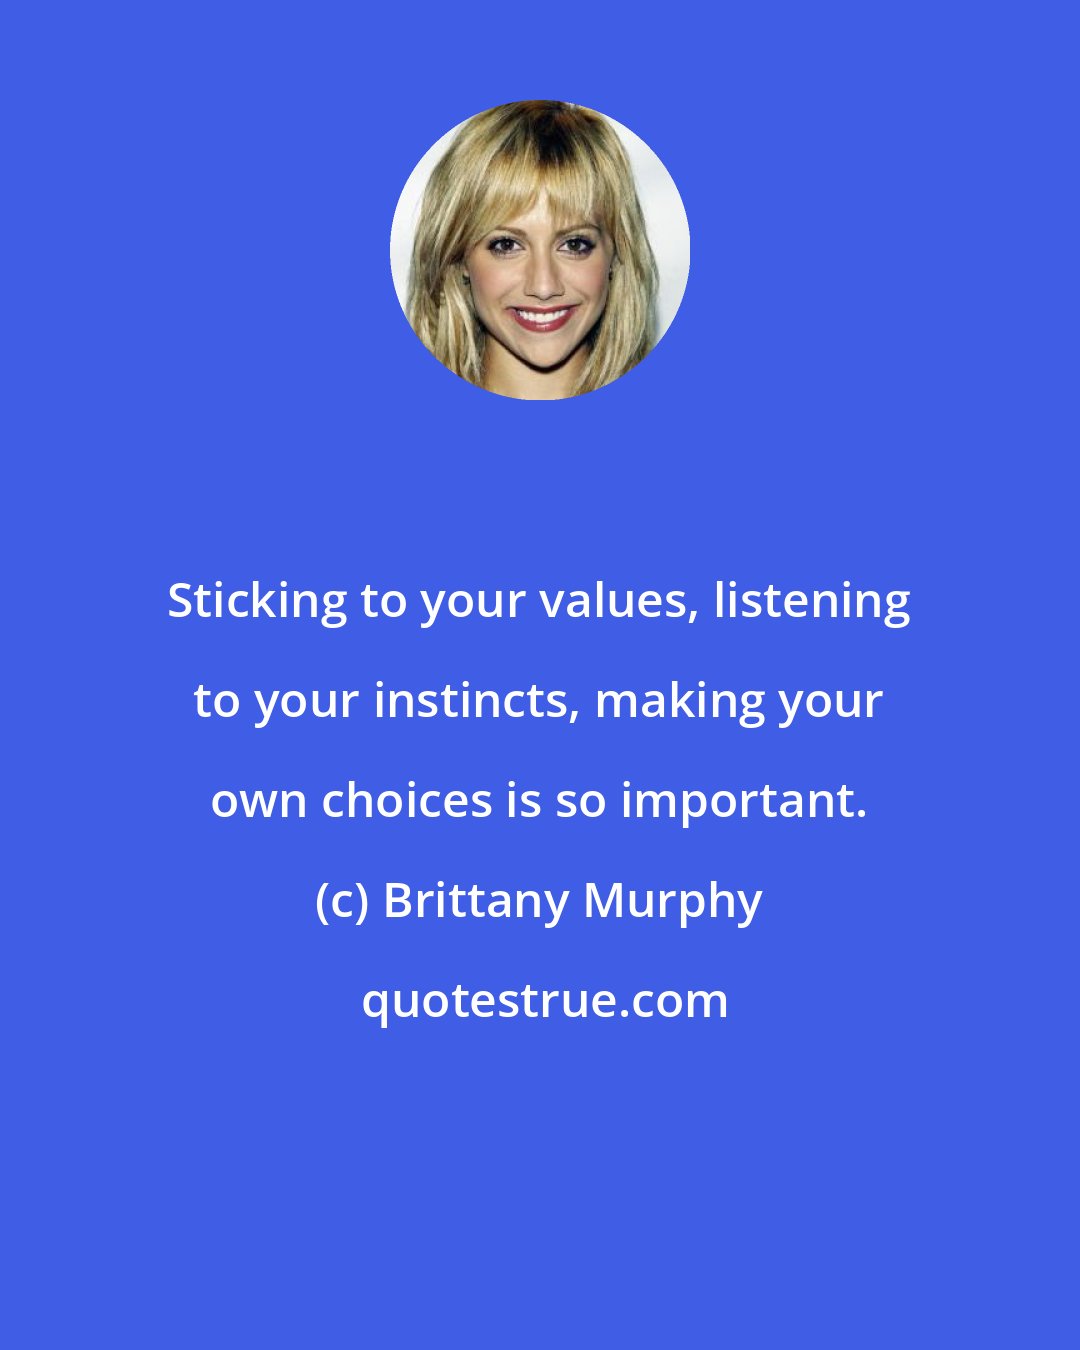 Brittany Murphy: Sticking to your values, listening to your instincts, making your own choices is so important.